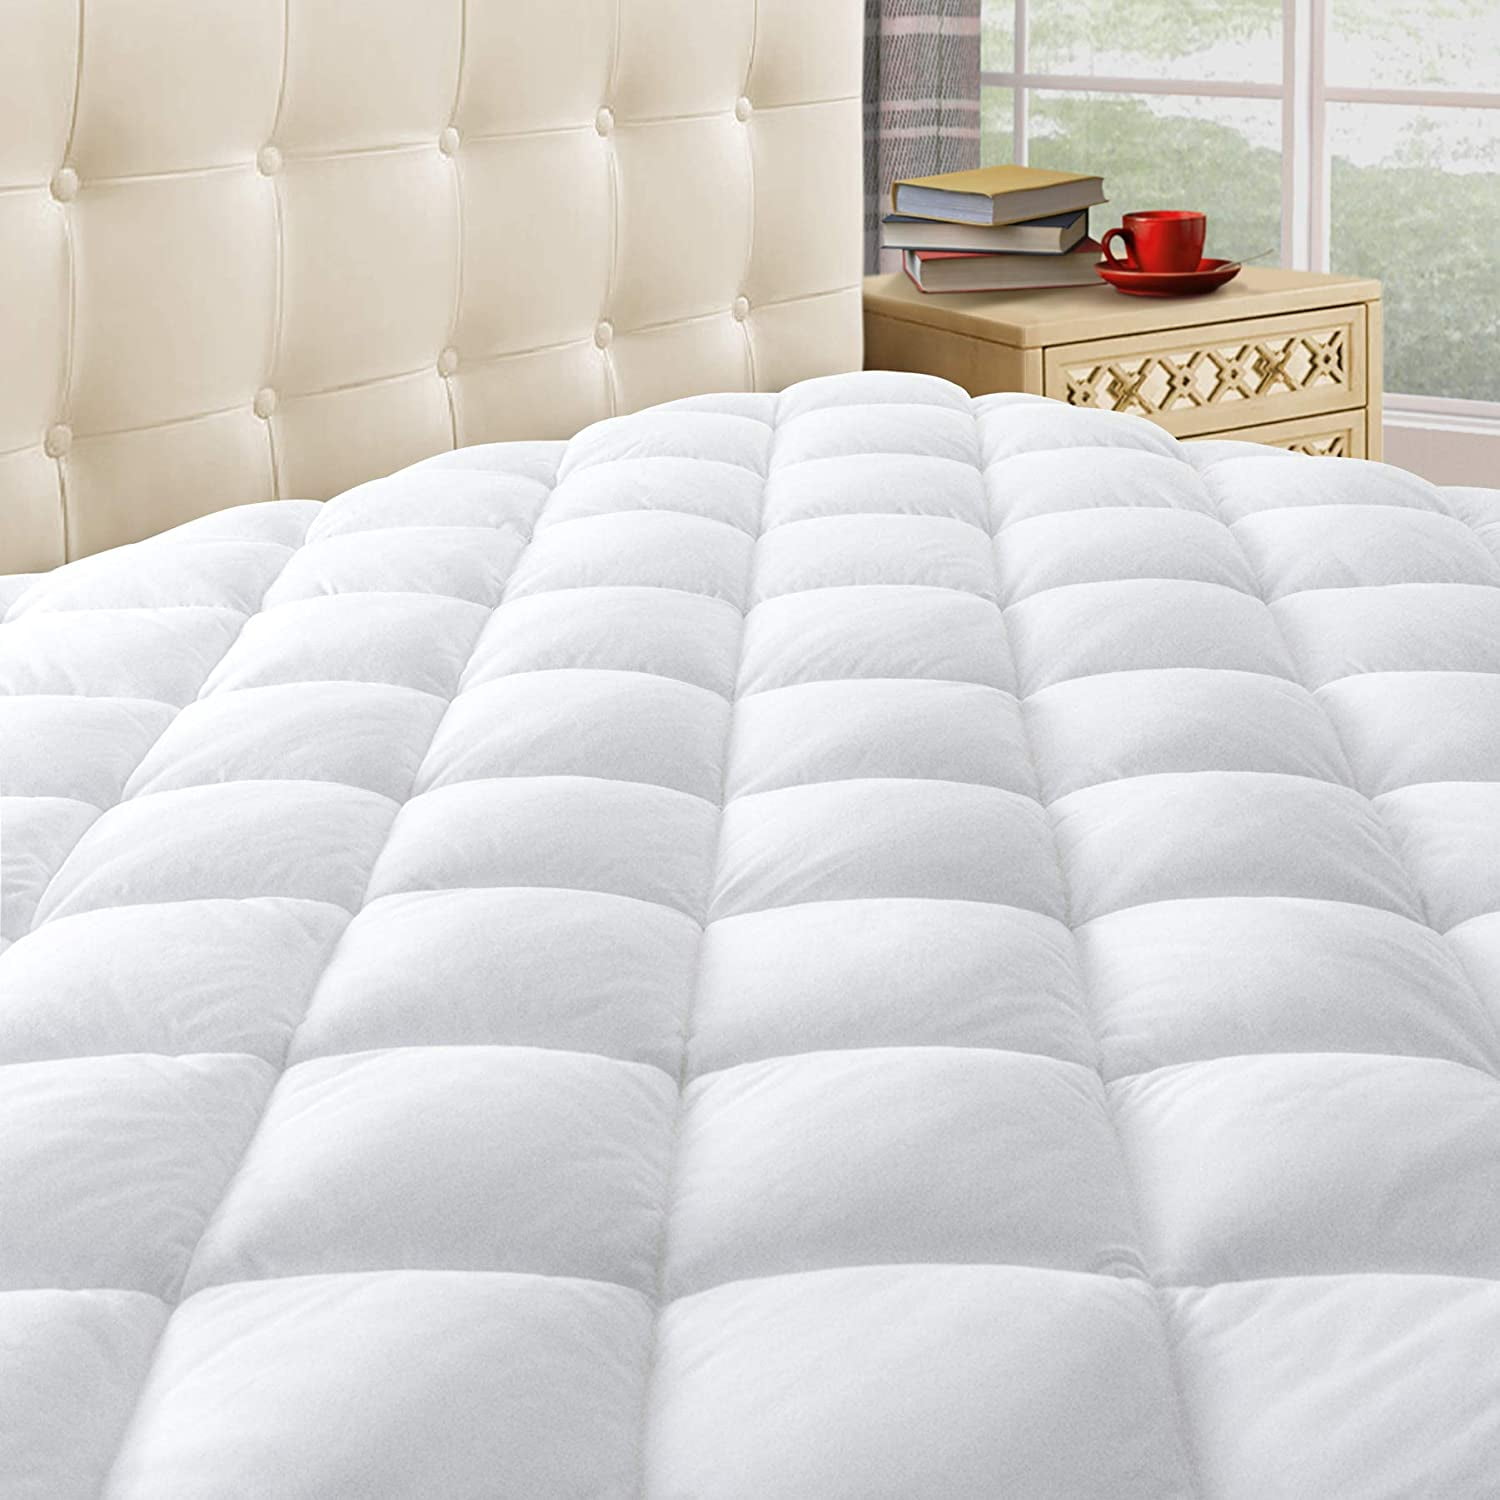 Details about   Pillowtop Matress Pad Microfiber Padded Quilted Mattress Topper Cotton Bed Cover 